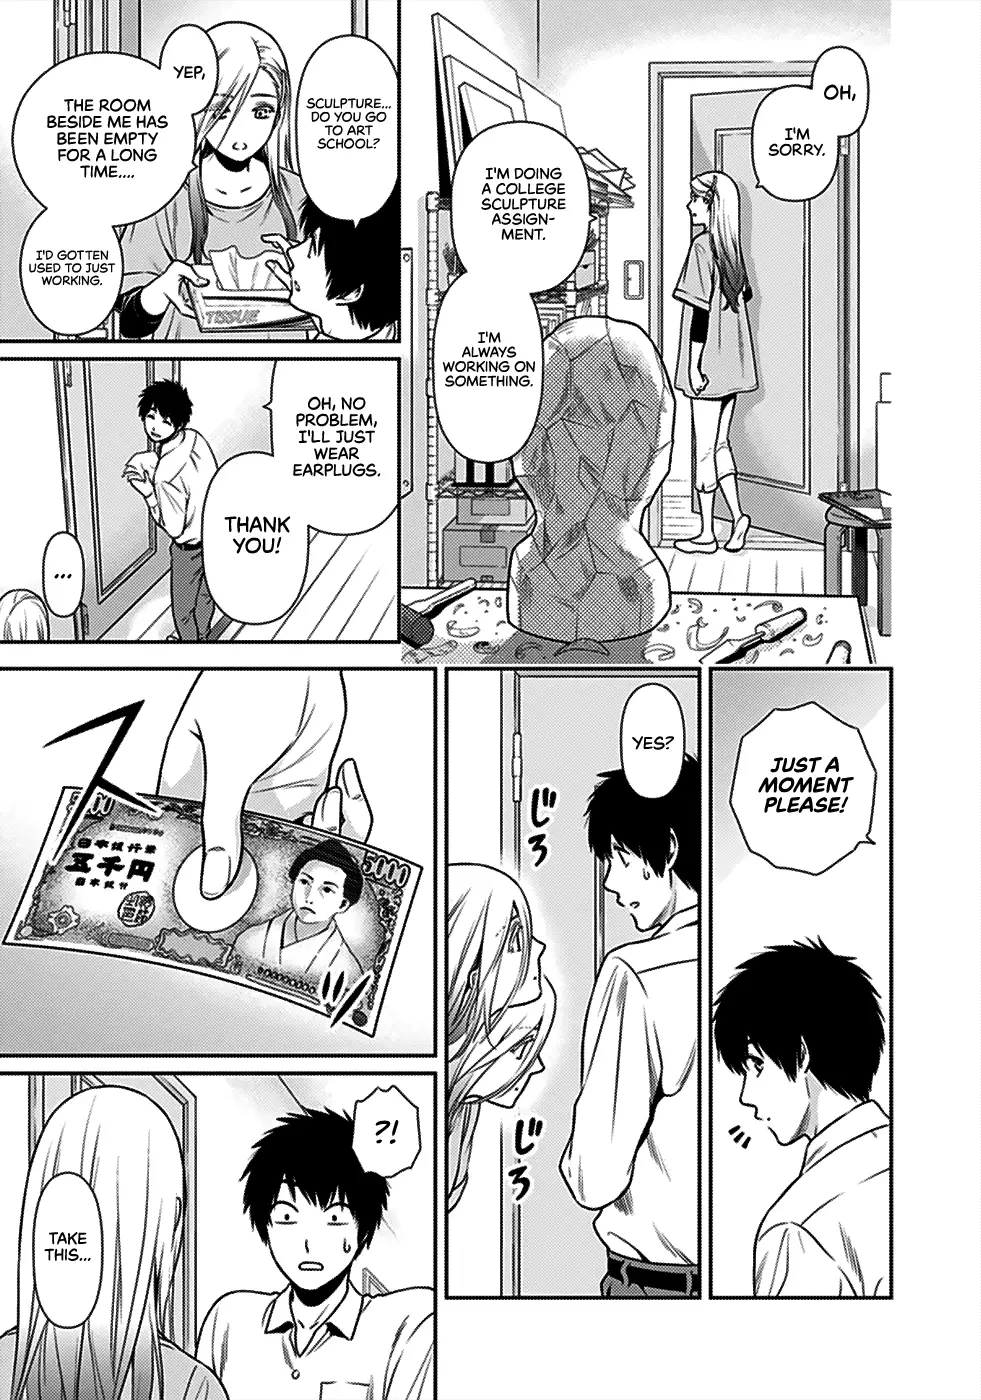 Can I Live With You? - 1 page 19-2609f916